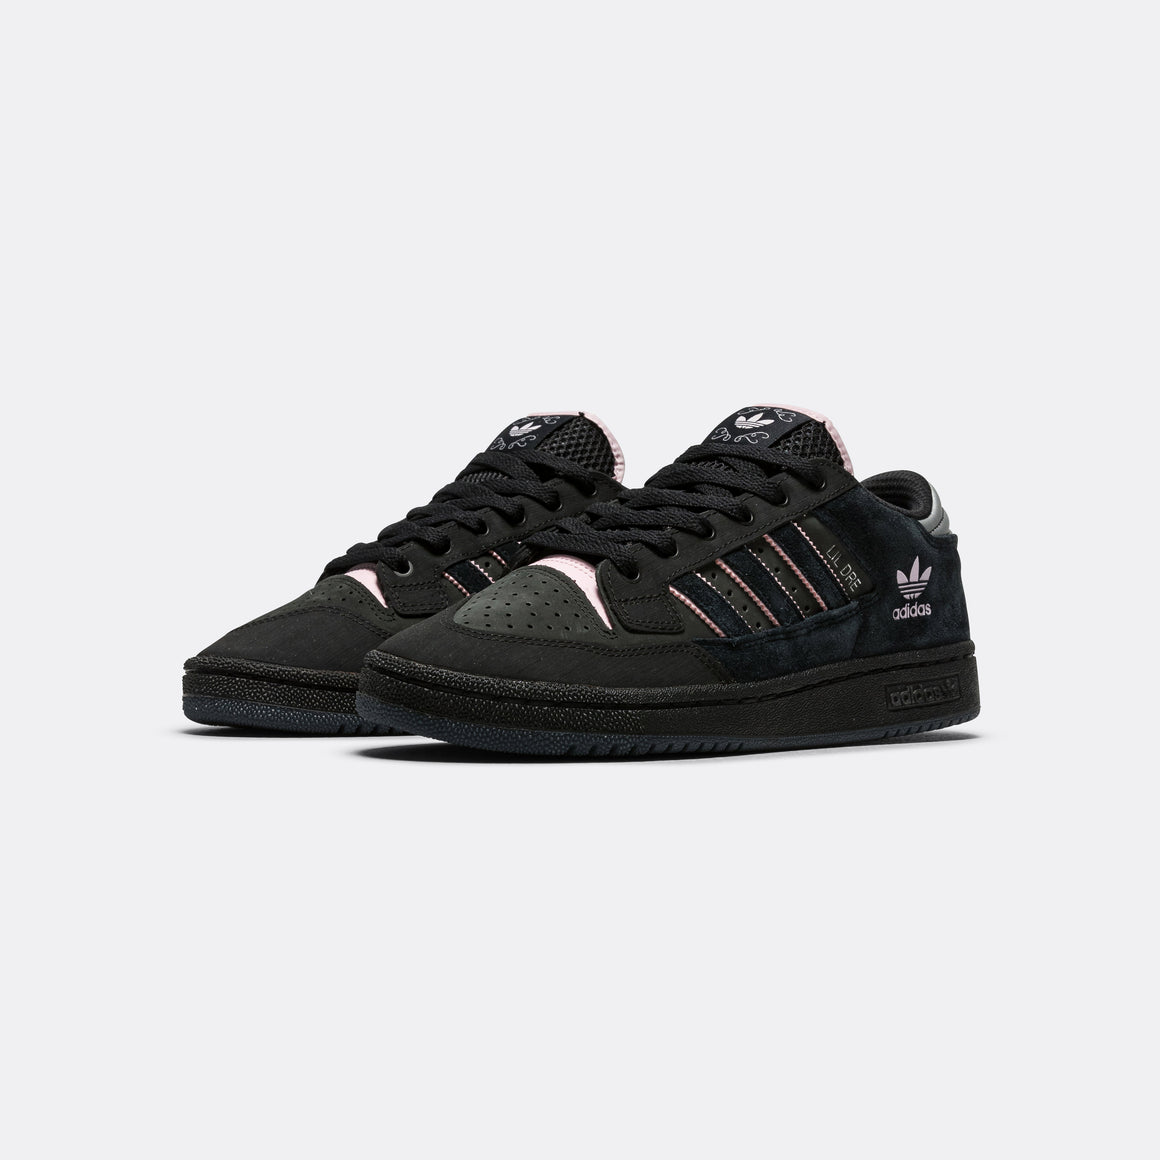 adidas - Centennial 85 Lo ADV x LIL DRE - Core Black/Clear Pink - UP THERE